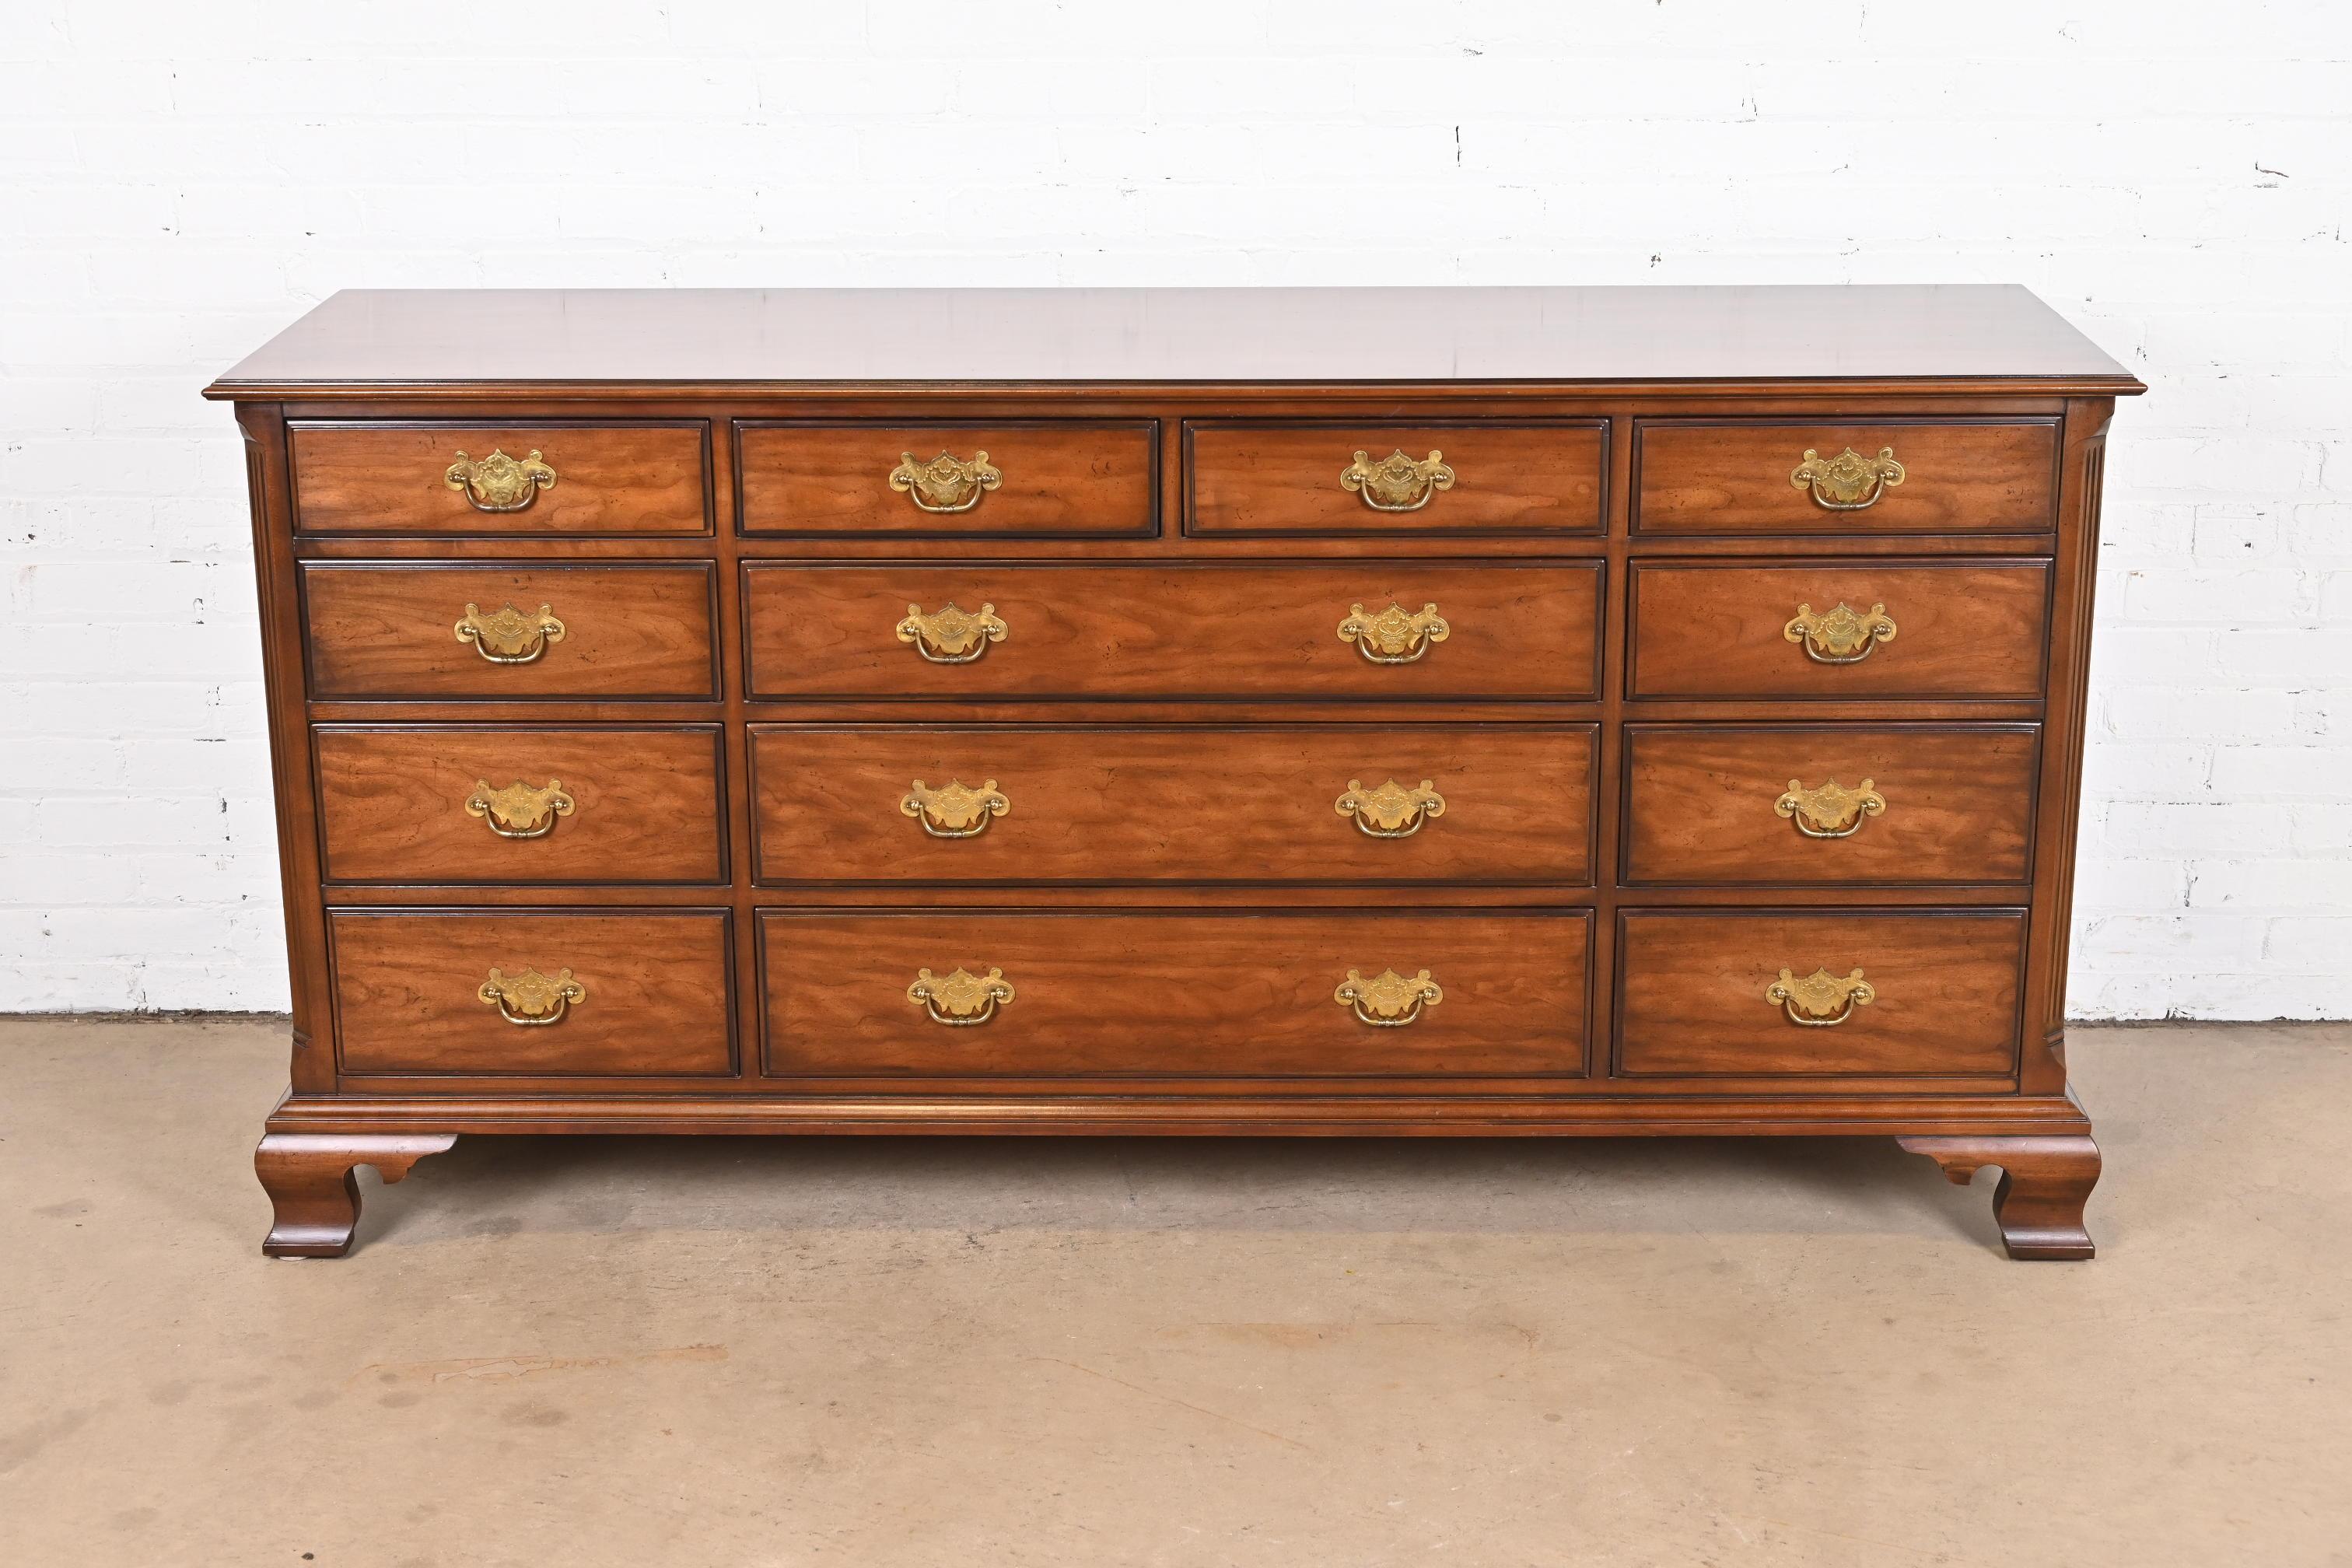 An exceptional Georgian or Chippendale style thirteen-drawer dresser chest

By Kindel Furniture

USA, Late 20th Century

Solid cherry wood, with original brass hardware.

Measures: 70.75